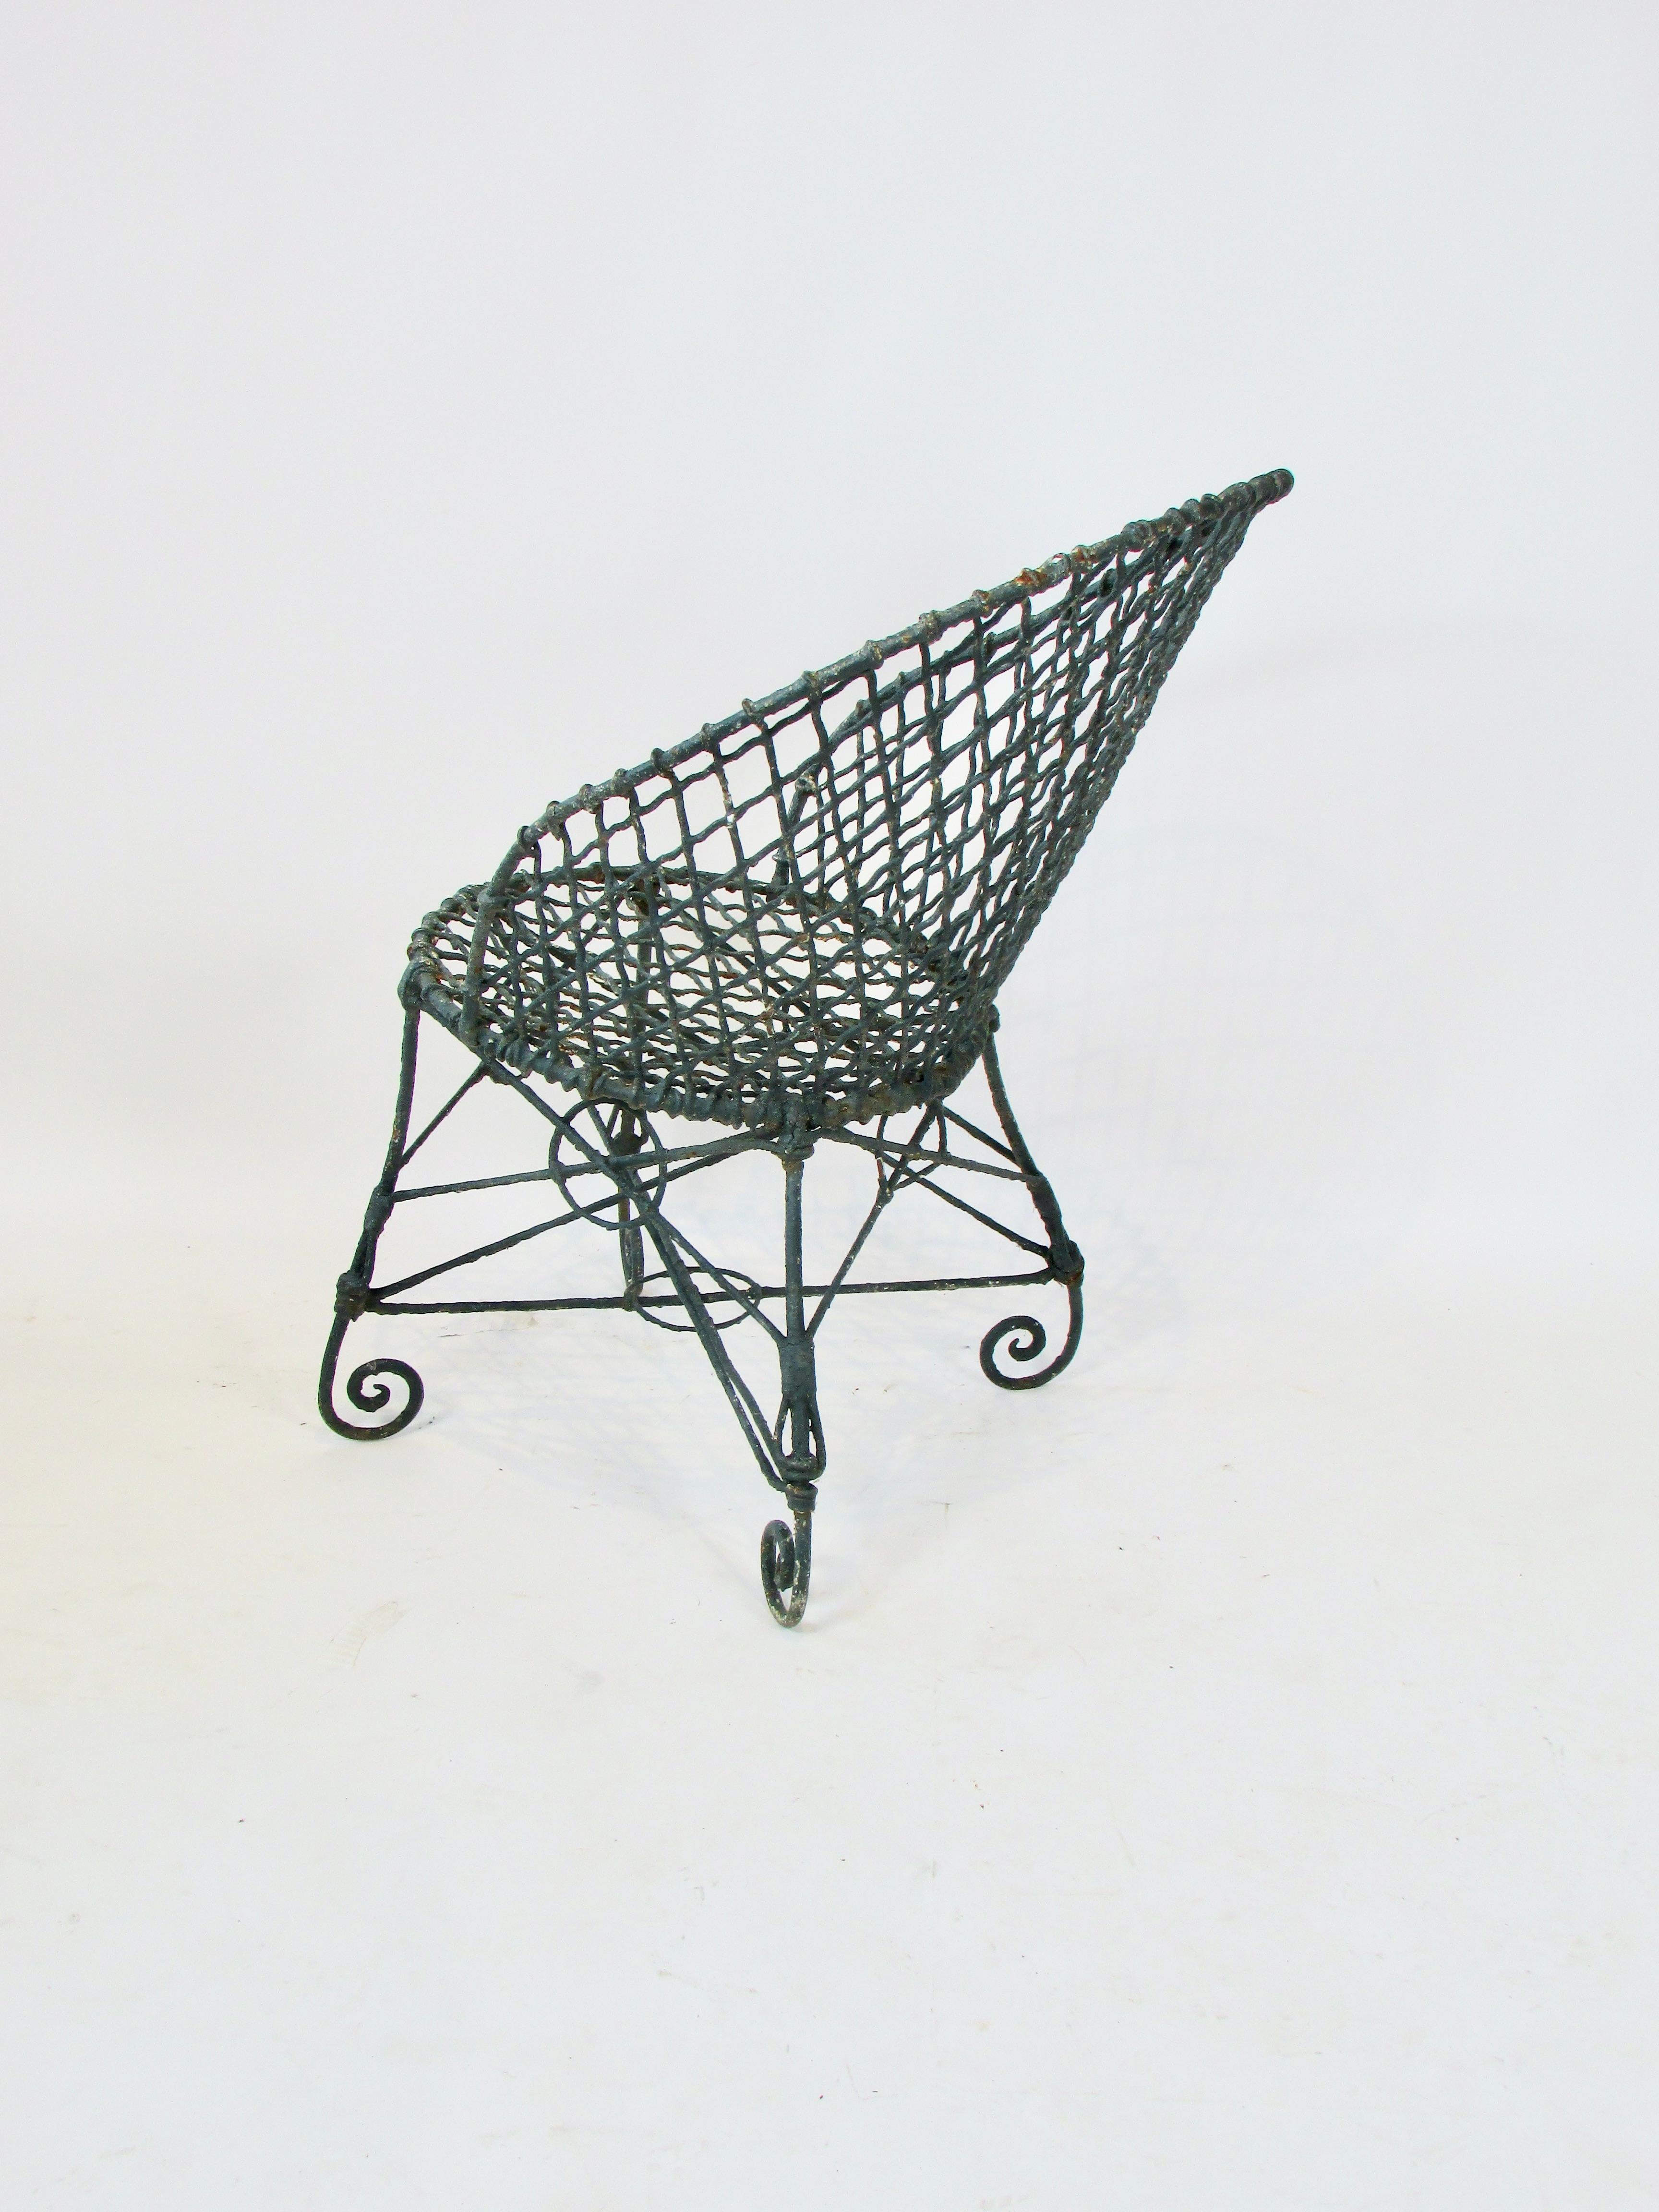 Late Victorian Early 20th Century wire garden chair in old paint and patina